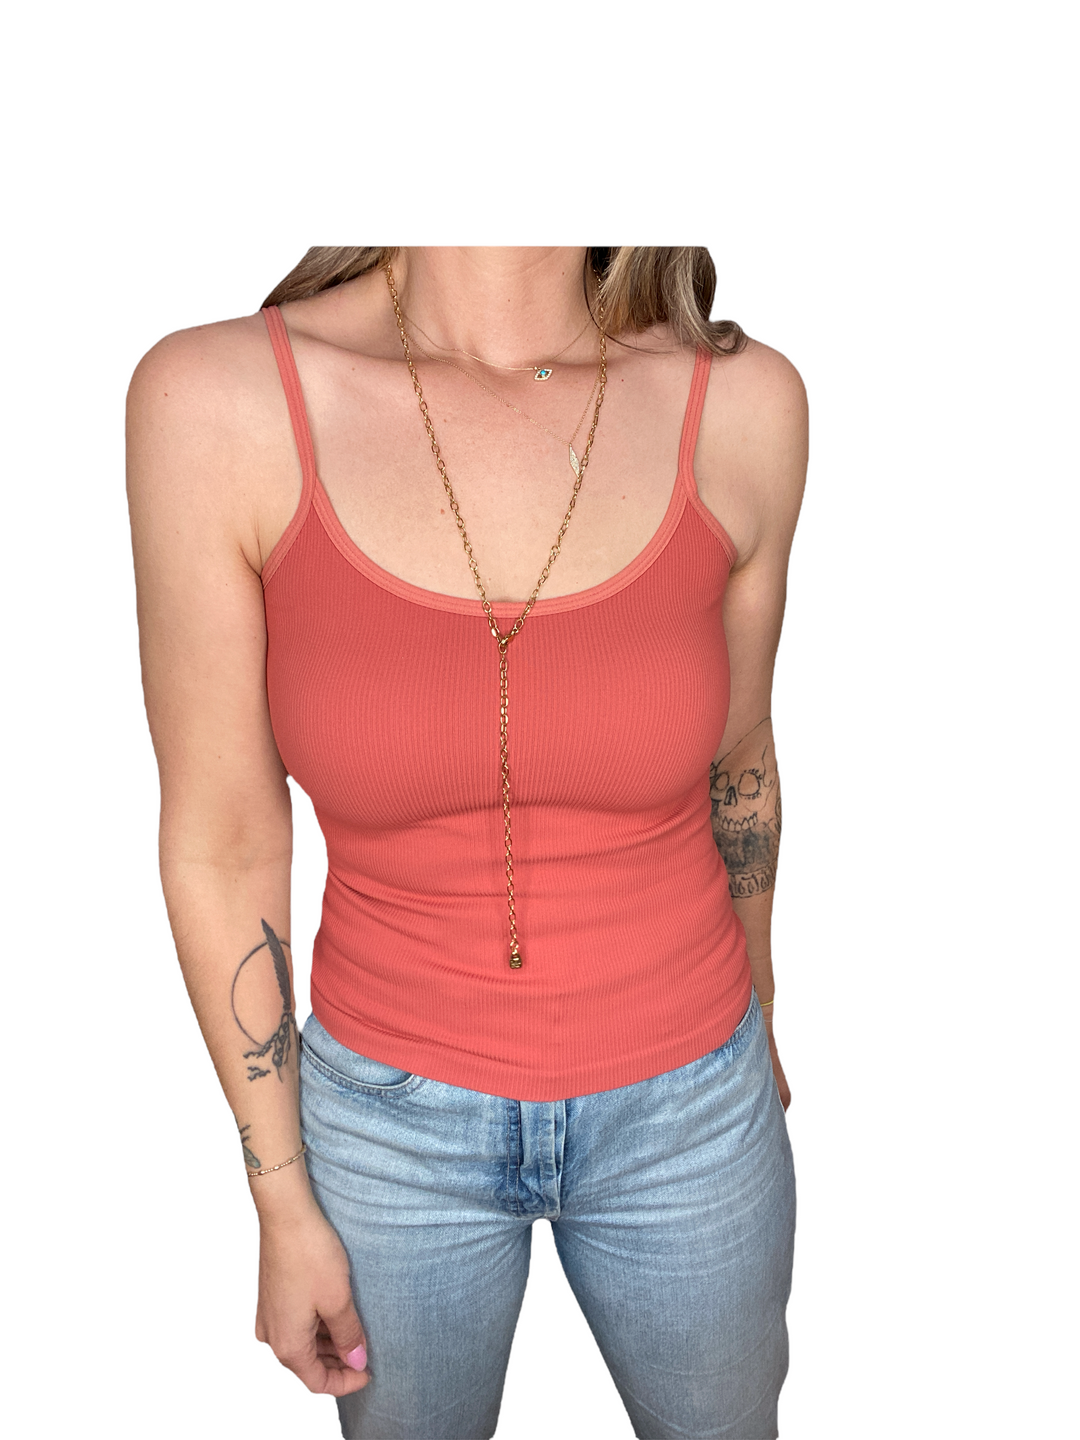 ROCK CORAL THIN STRAP SCOOP NECK TANK